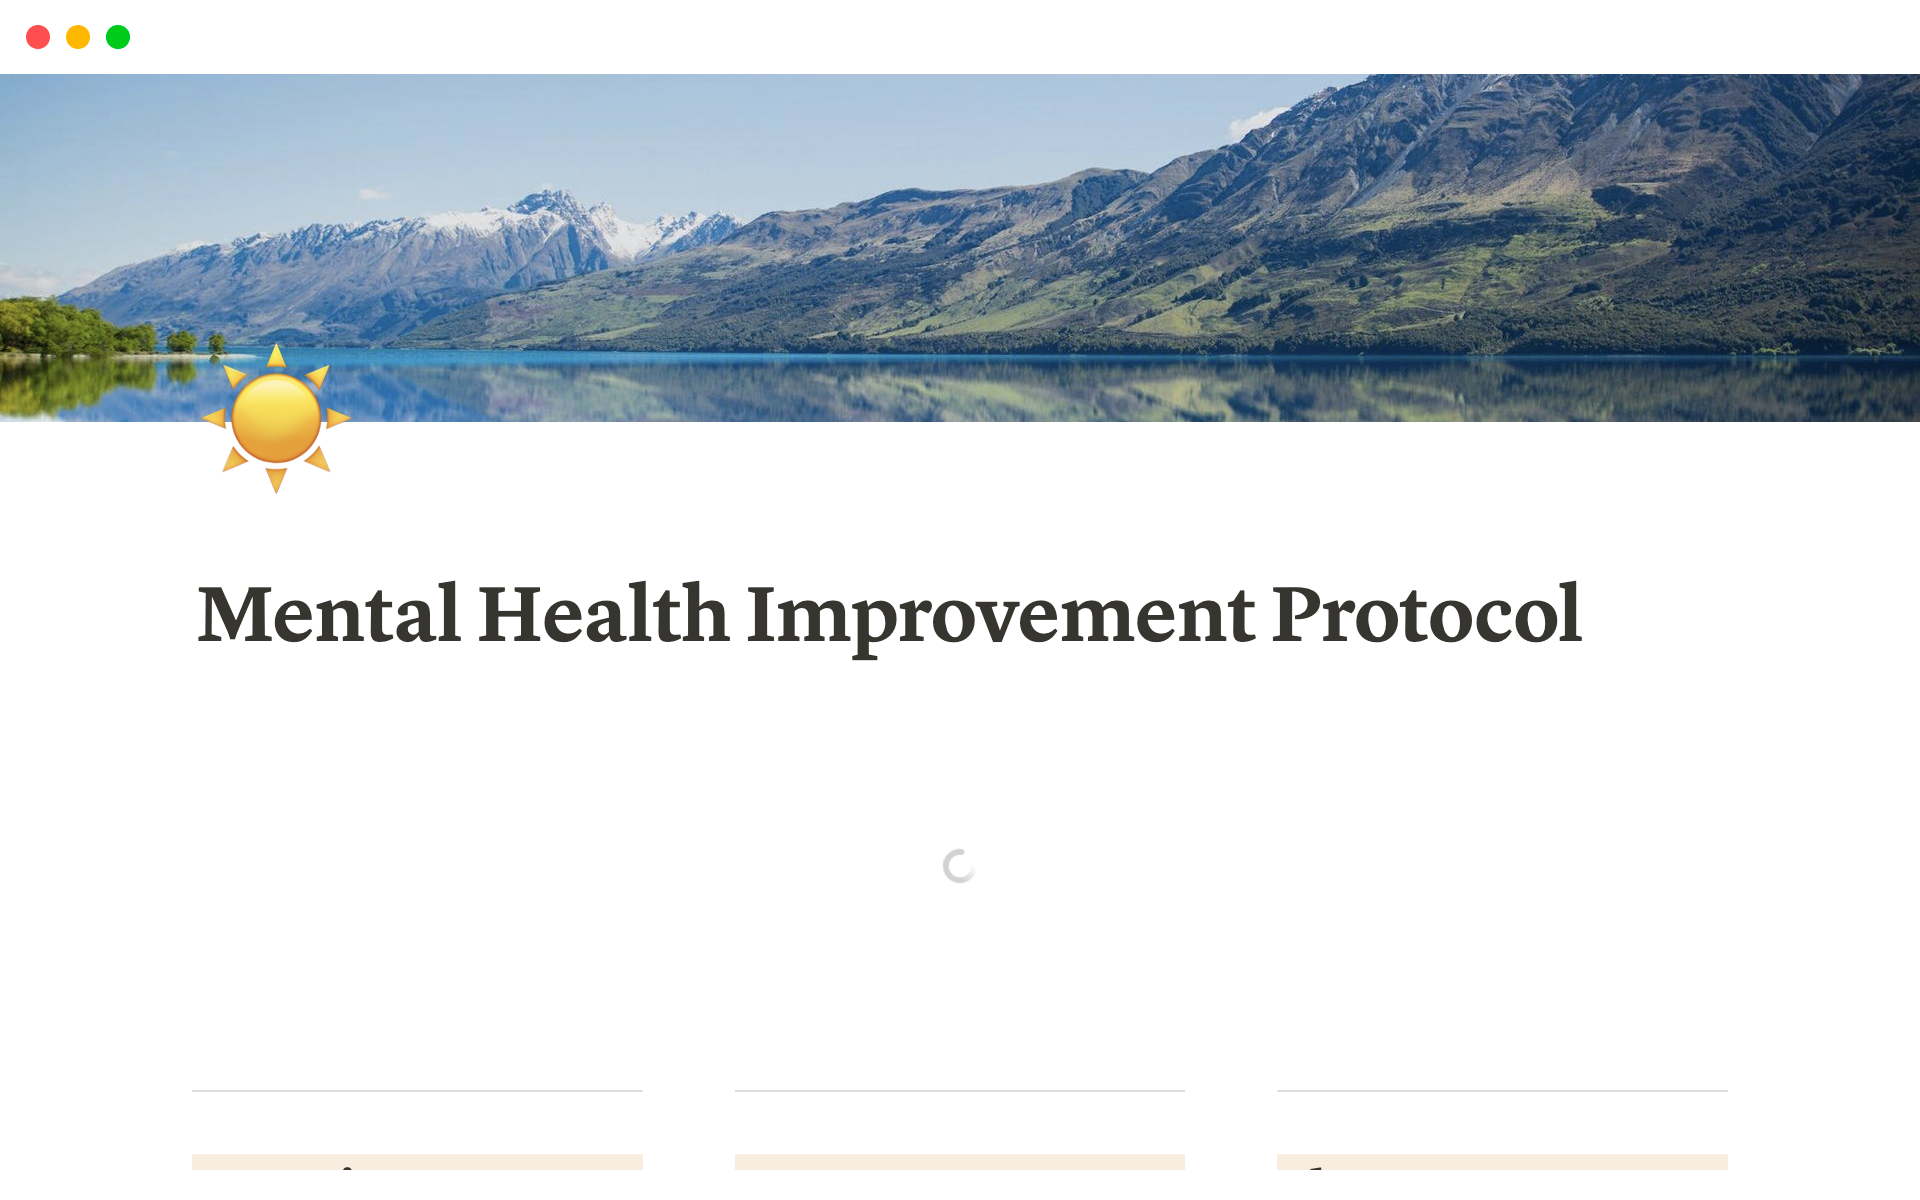 Gives guidance to create your own mental health improvement protocol, backed by science